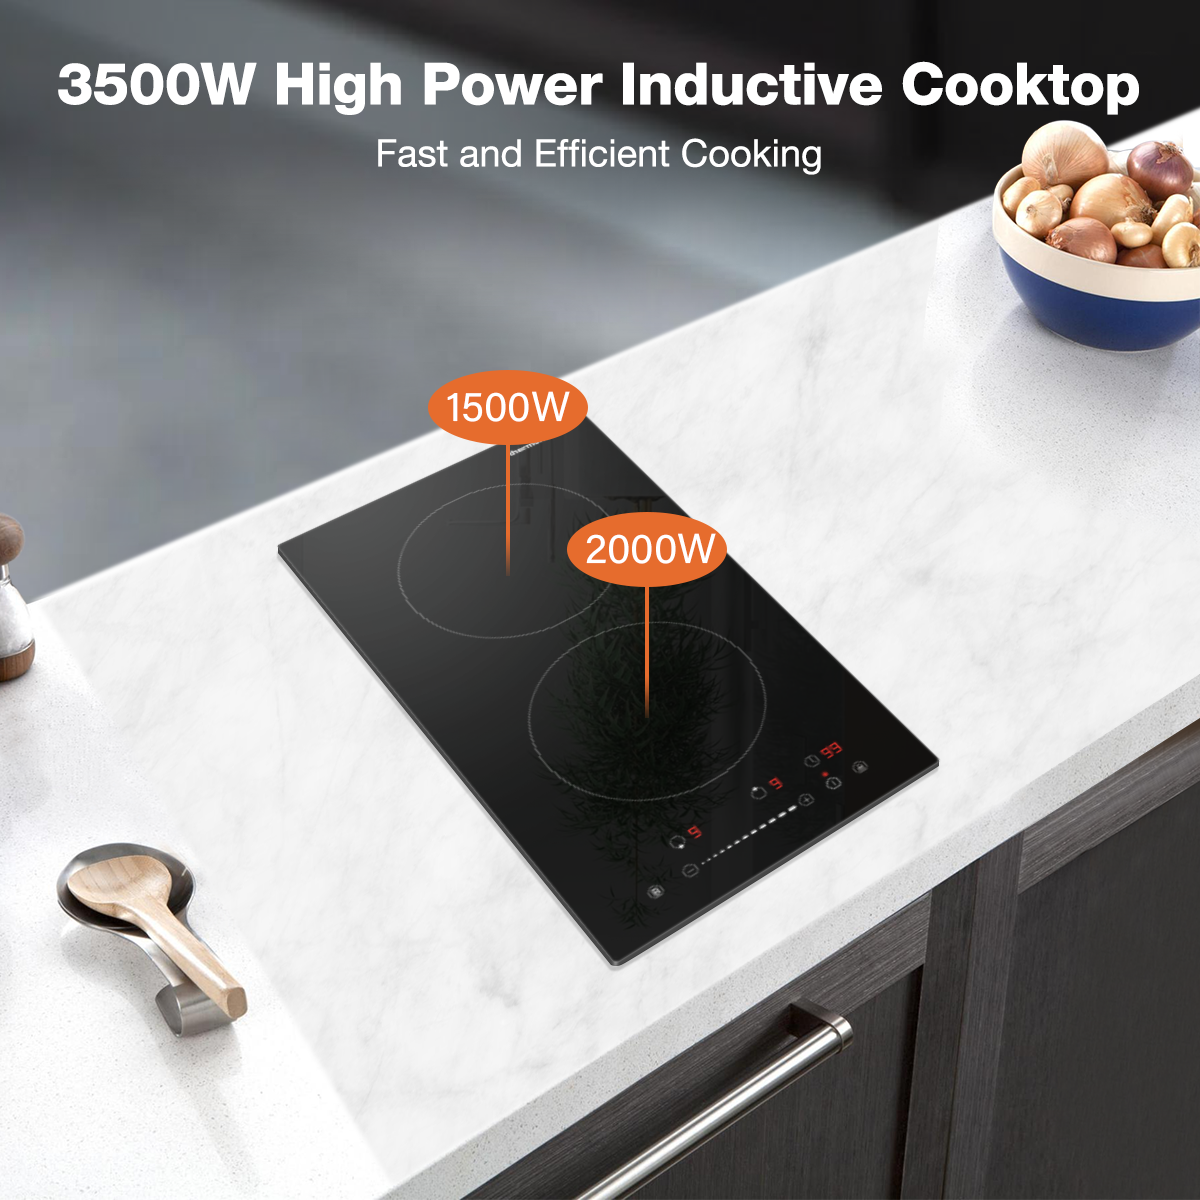 3500W High Power Inductive Cooktop | Thermomate